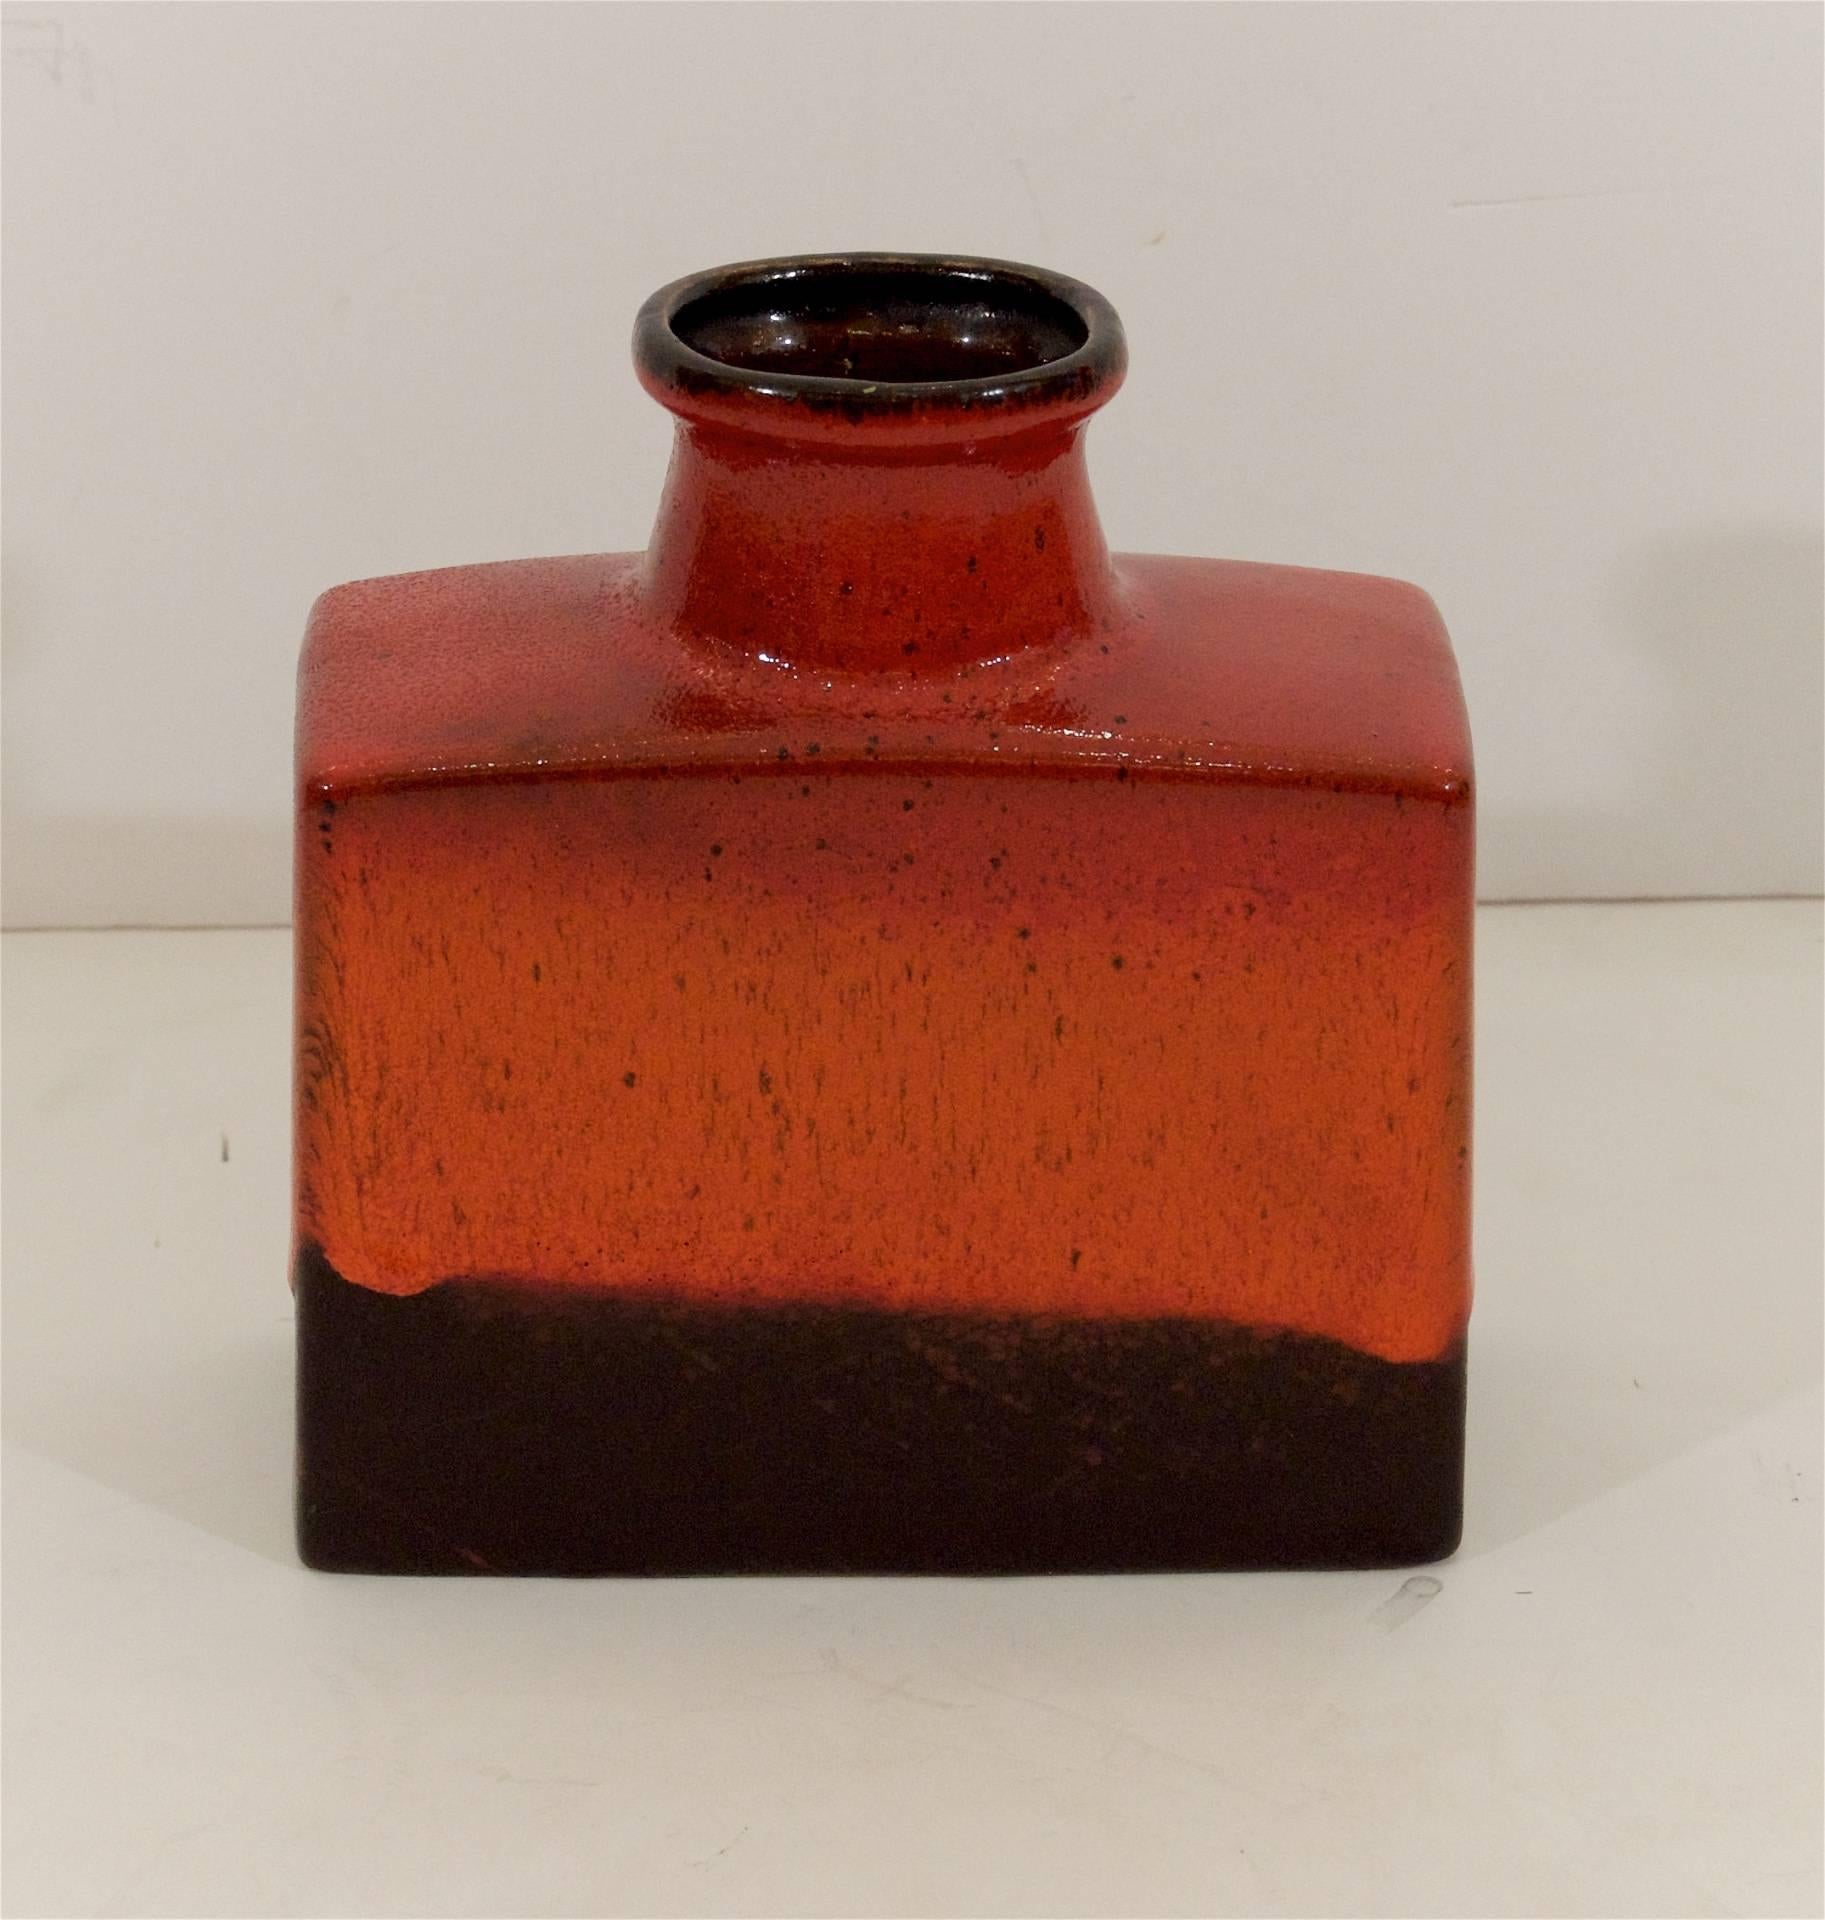 Well-formed Scheurich Keramik vase, the glaze in varigated gloss tones of red ochres dissolving to a matte earth tone base glaze.